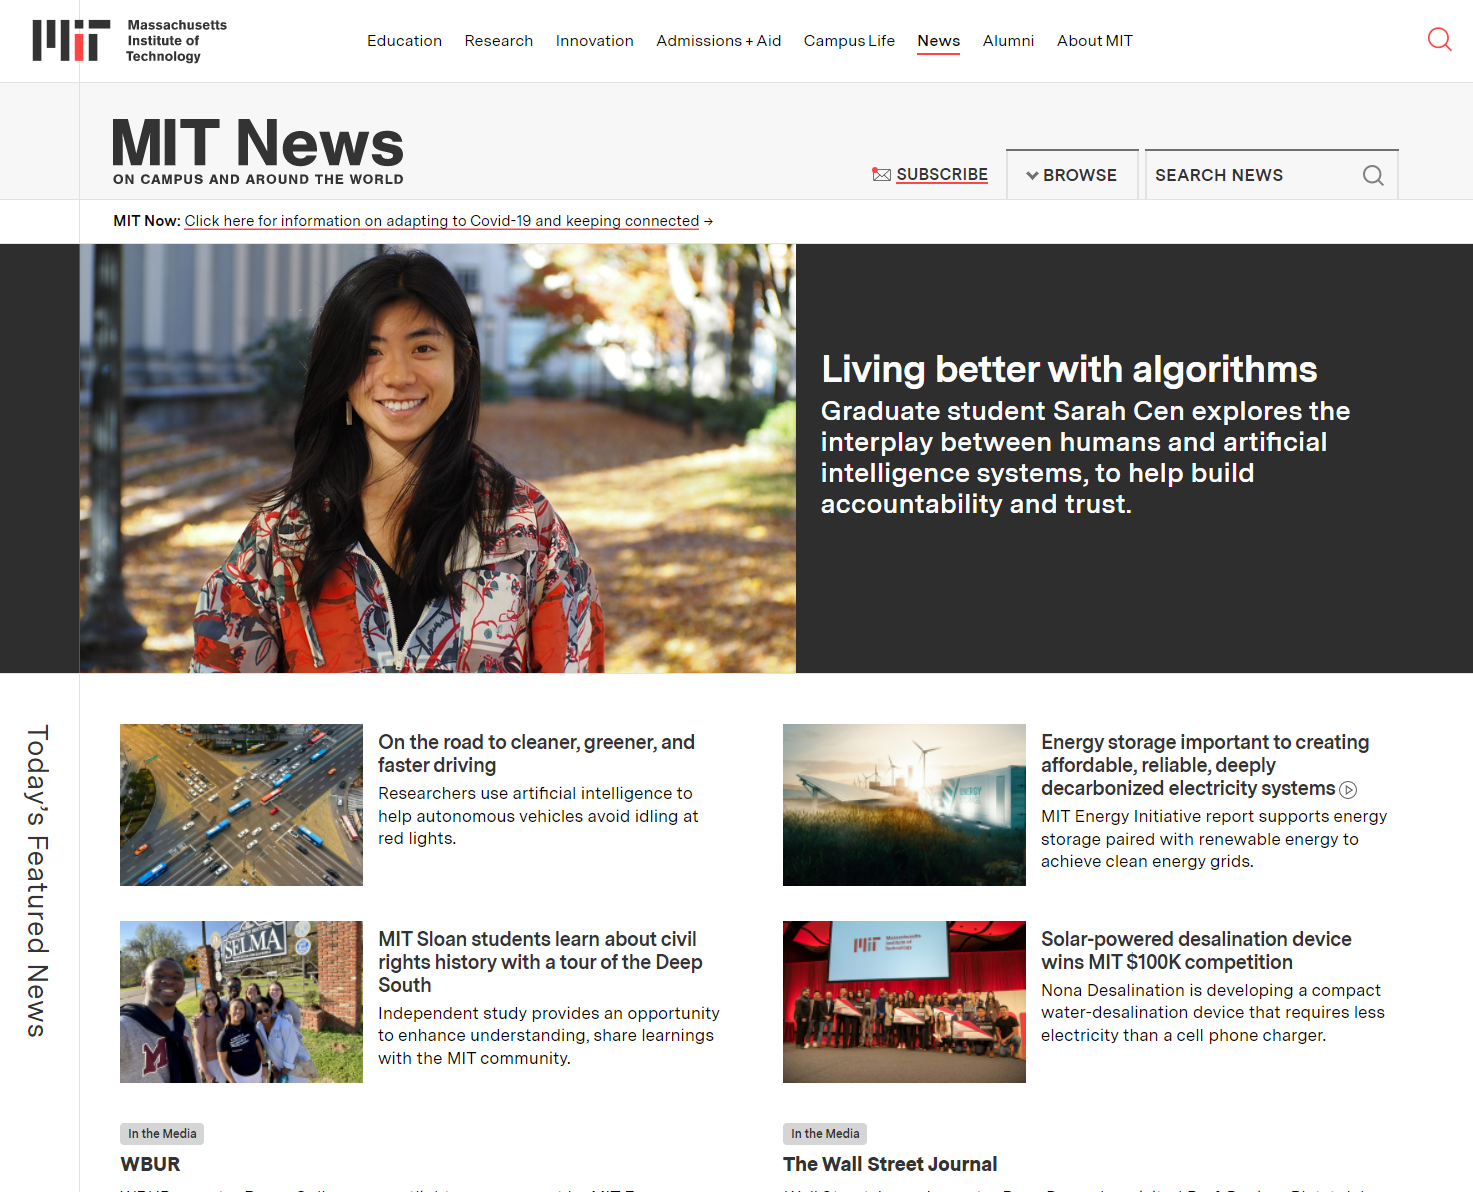 great university home page designs - MIT